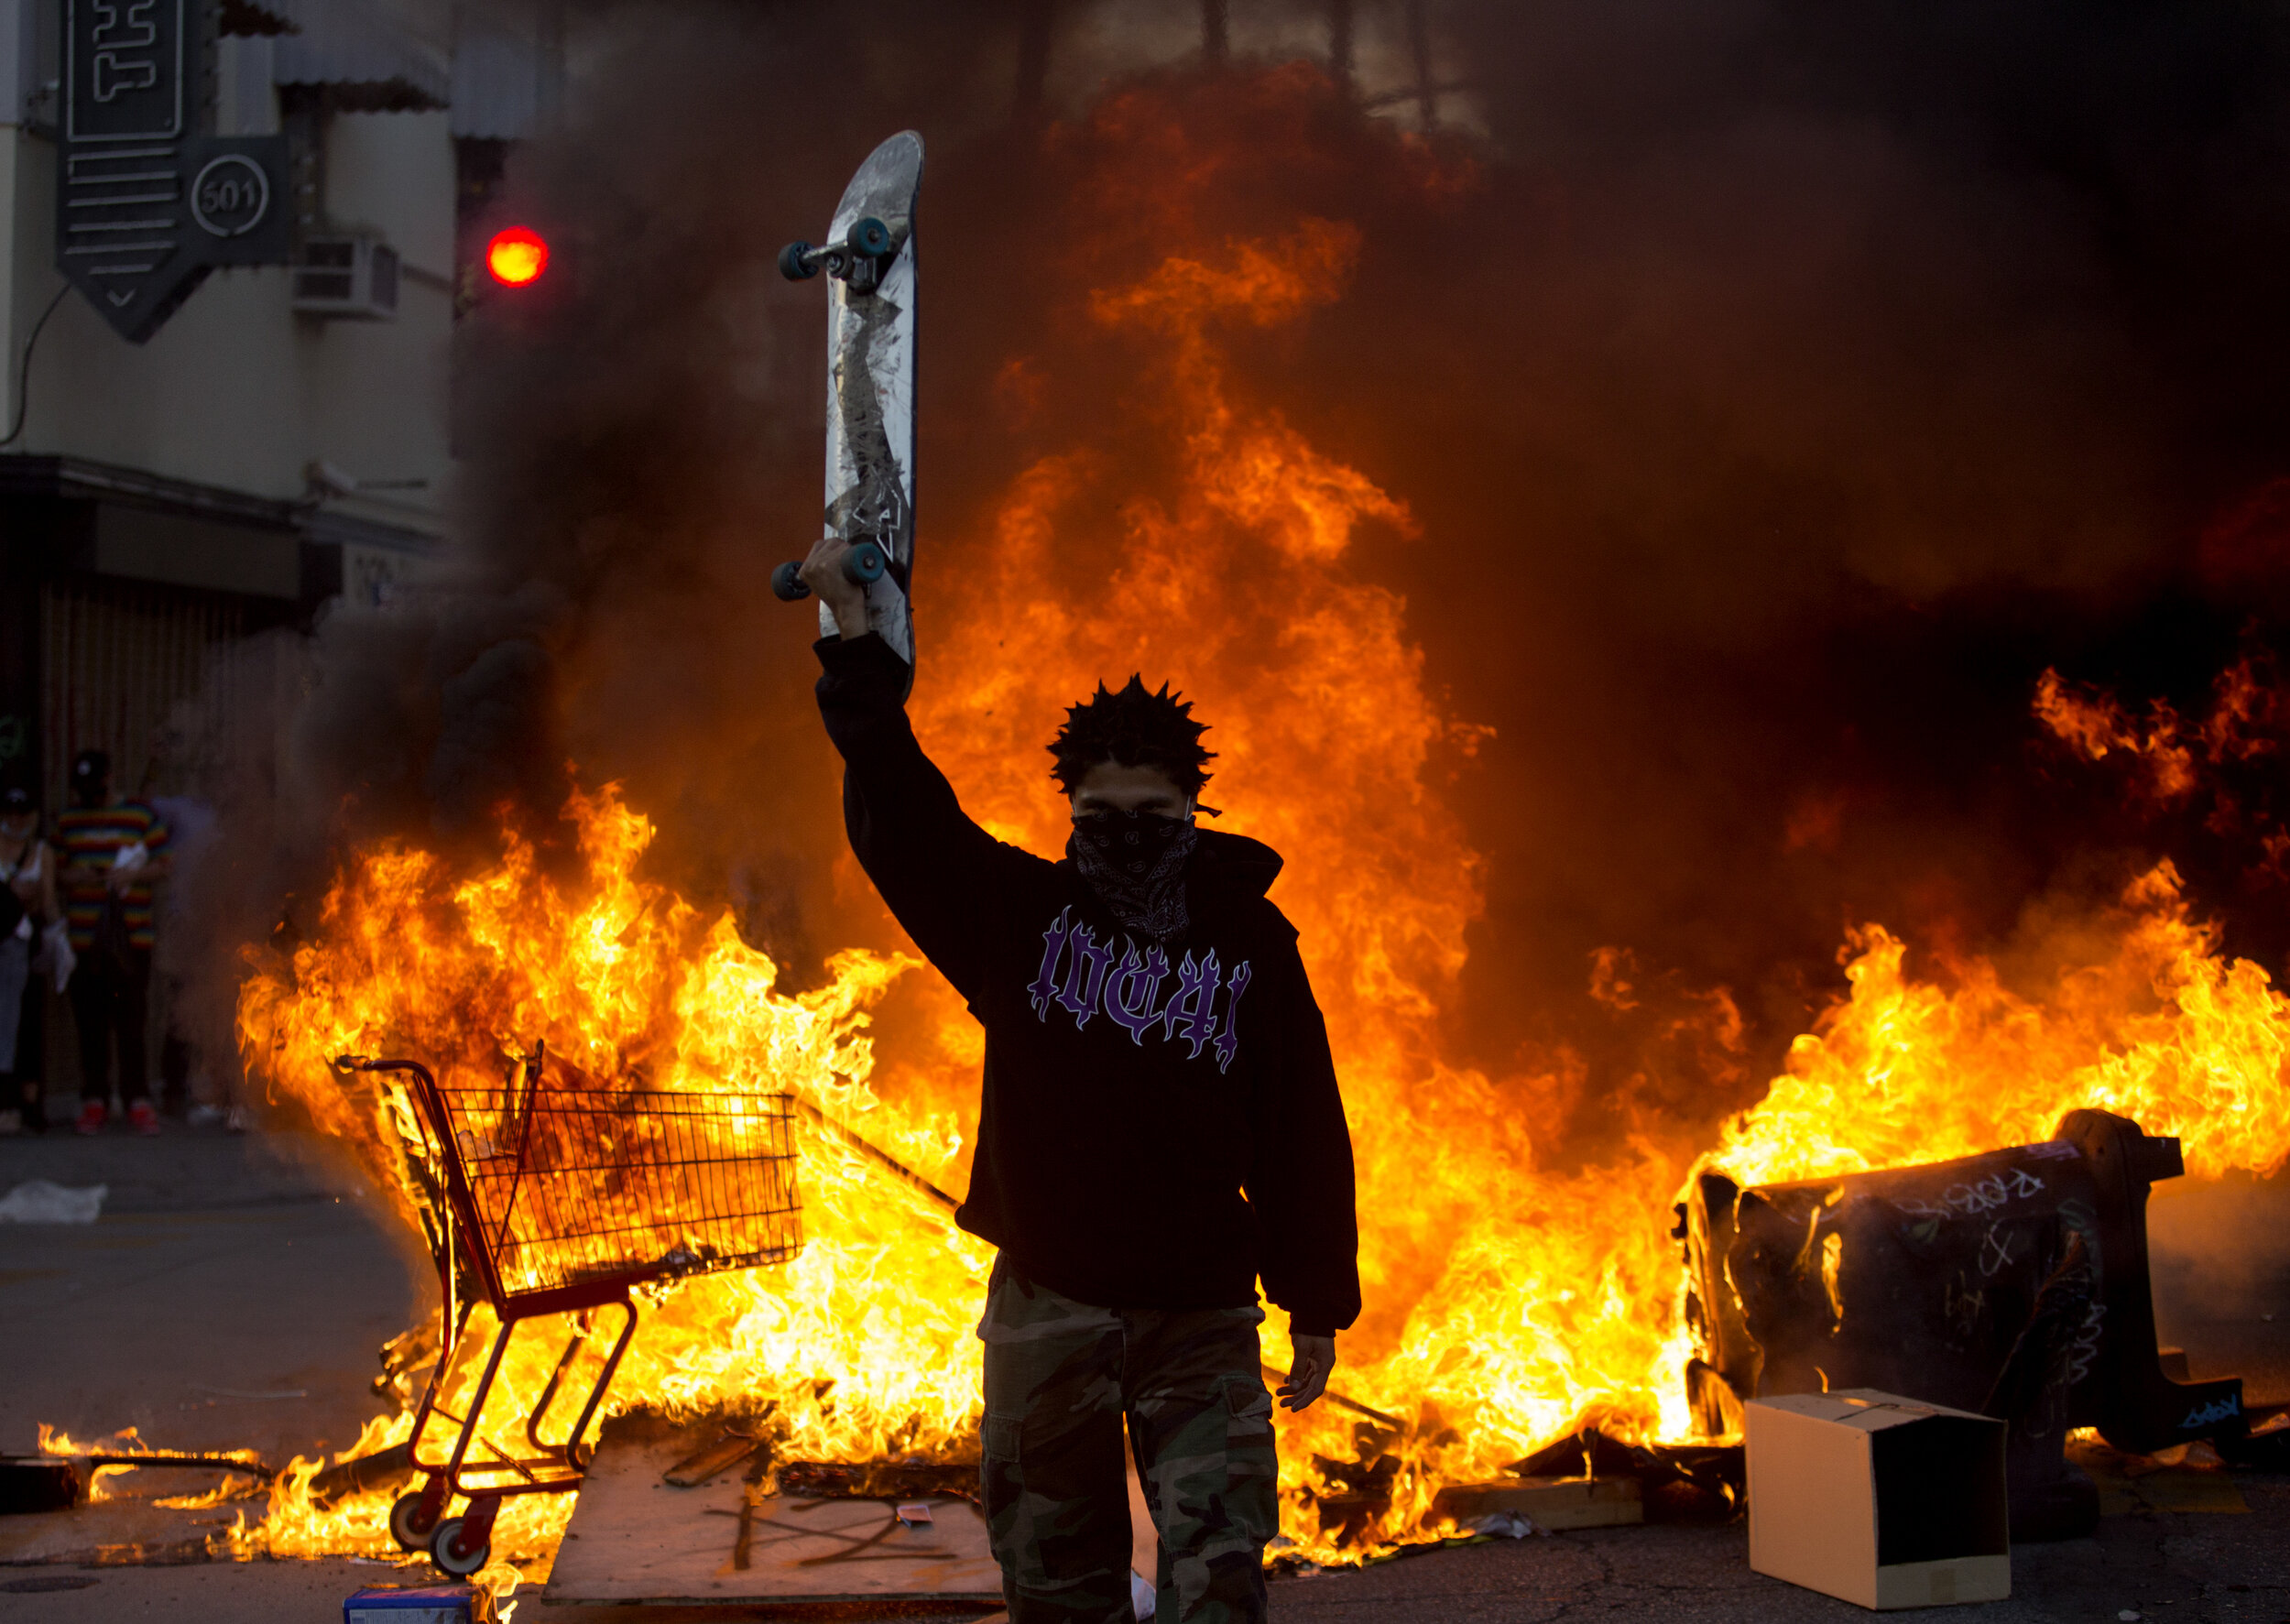  A protester holds a skateboard in front of a fire during a protest over the death of George Floyd, a handcuffed black man in police custody in Minneapolis, in Los Angeles, Saturday, May 30, 2020.The 2020 Black Lives Matter protests across the nation